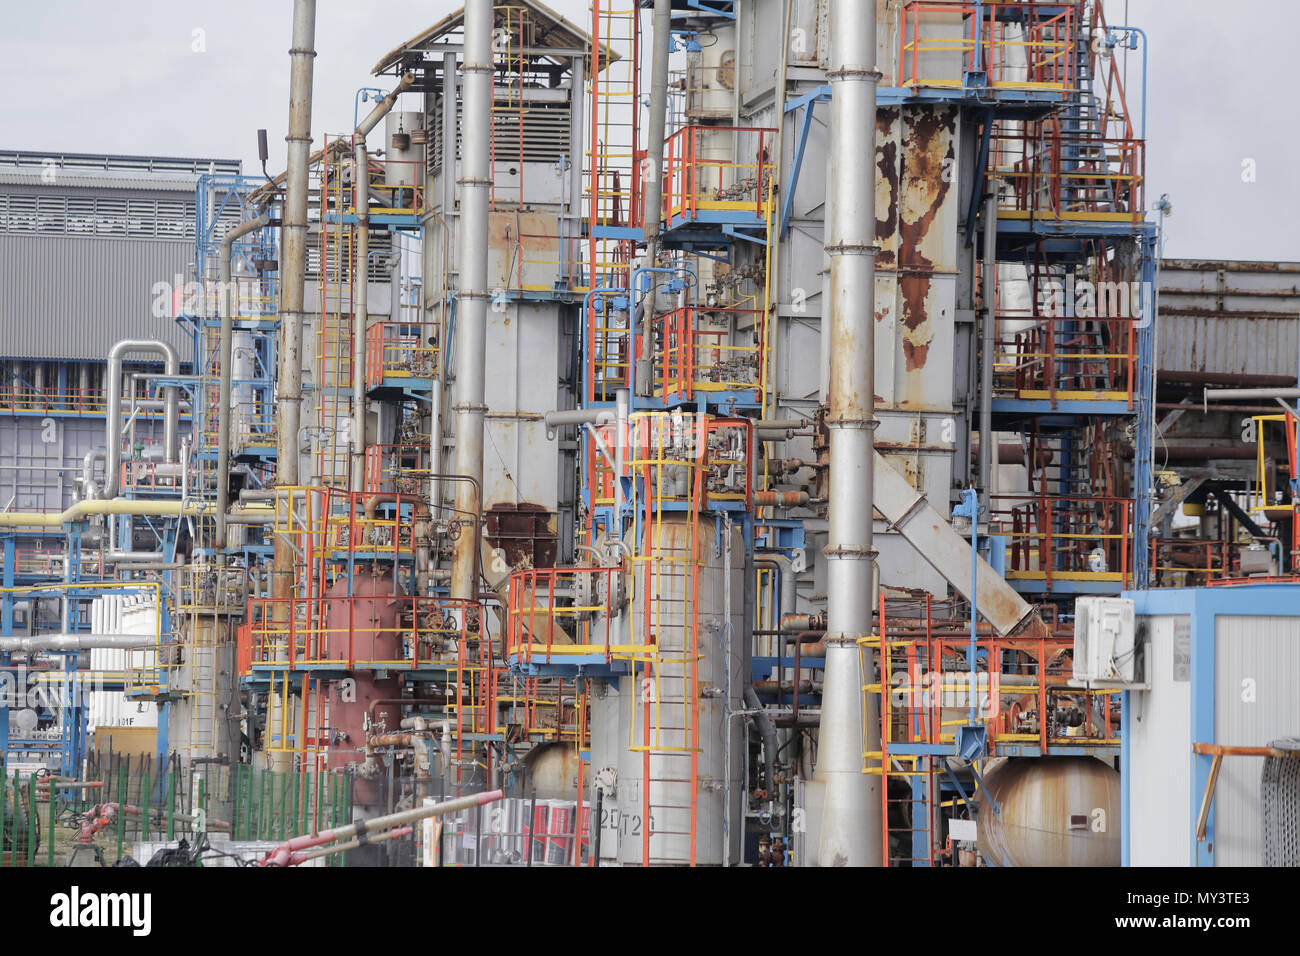 CONSTANTA, ROMANIA - MAY 19, 2018: Details with the equipment in an oil refinery Stock Photo